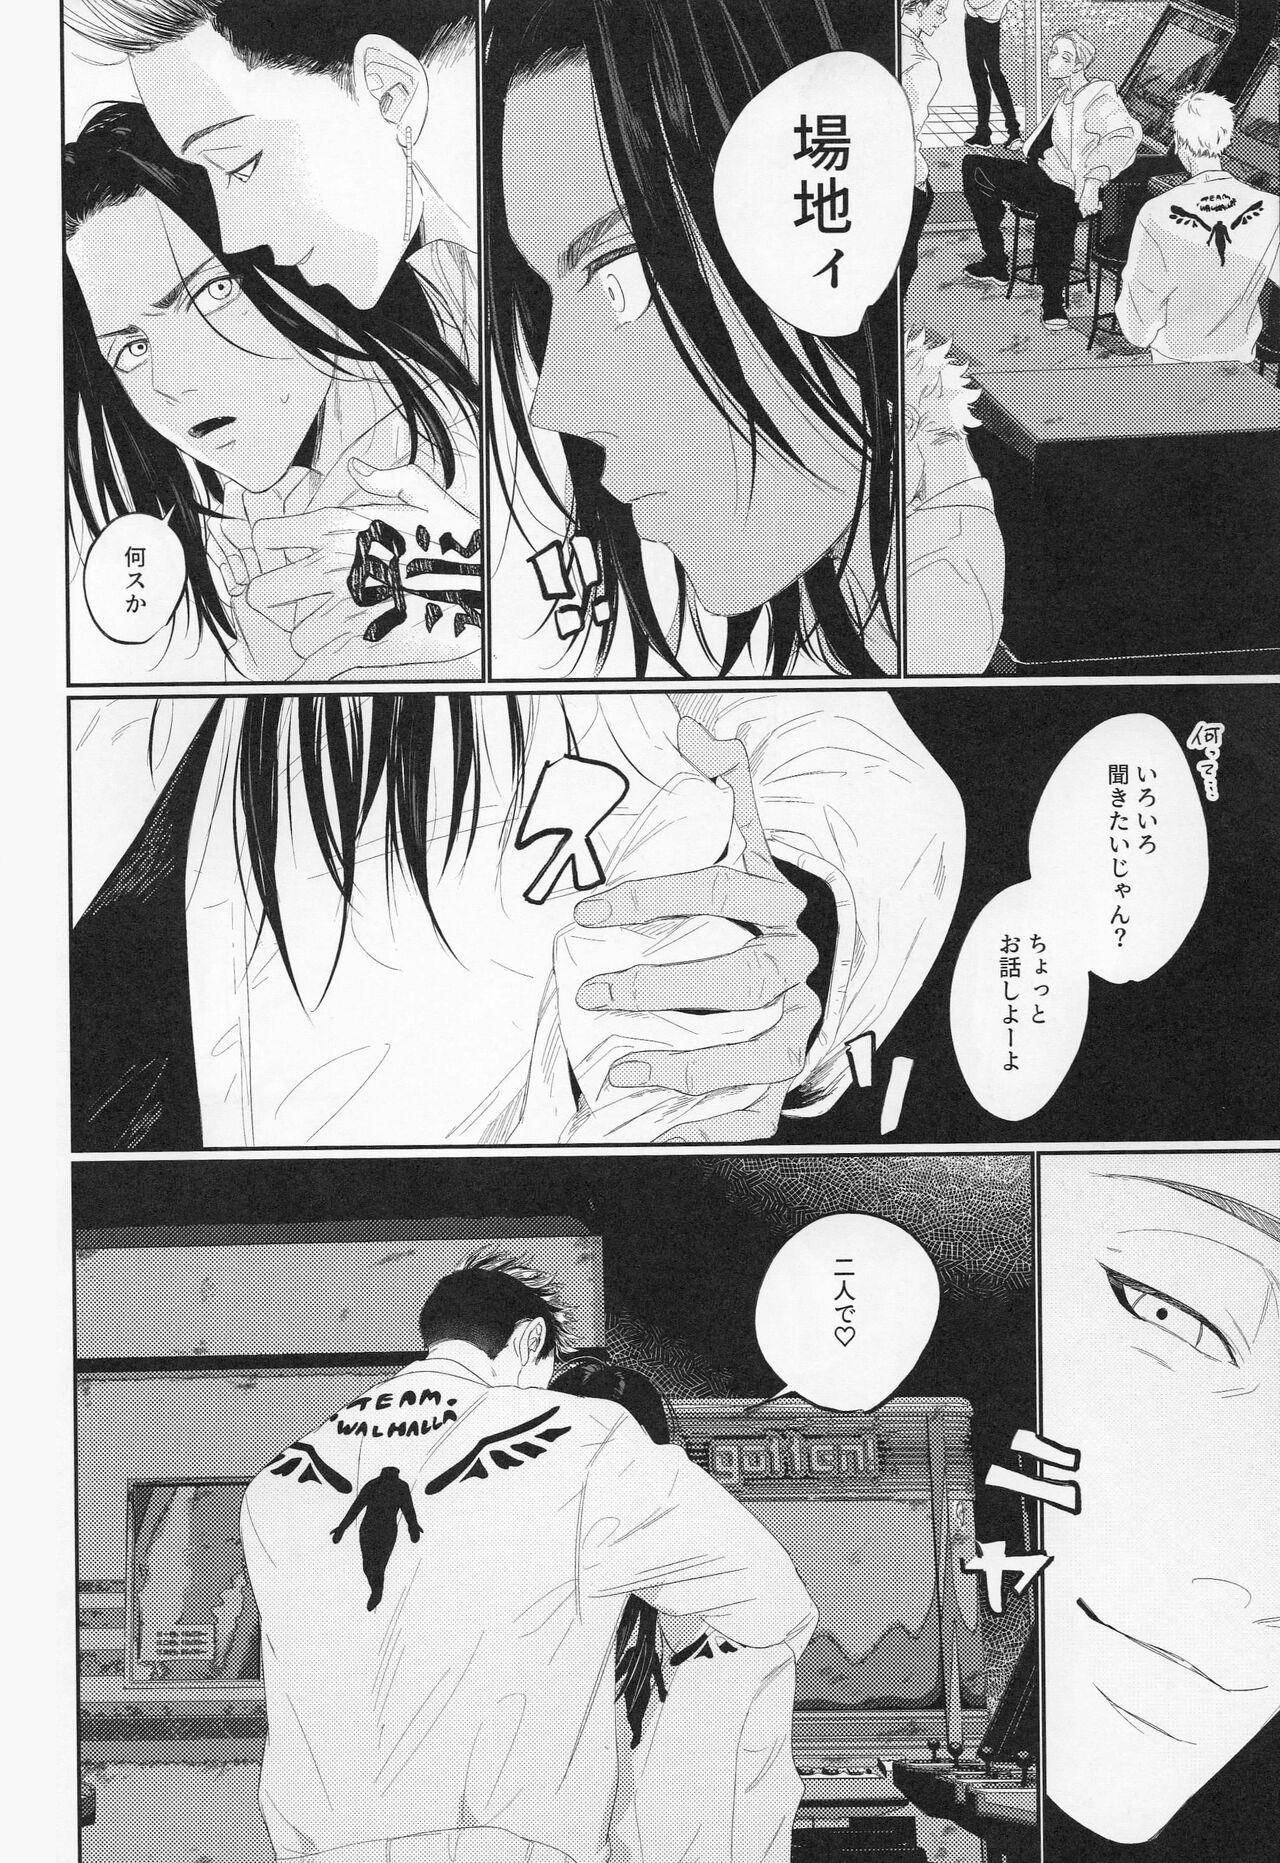 Punishment Valhalla e Youkoso - Welcome to Valhalla - Tokyo revengers Aunt - Page 5